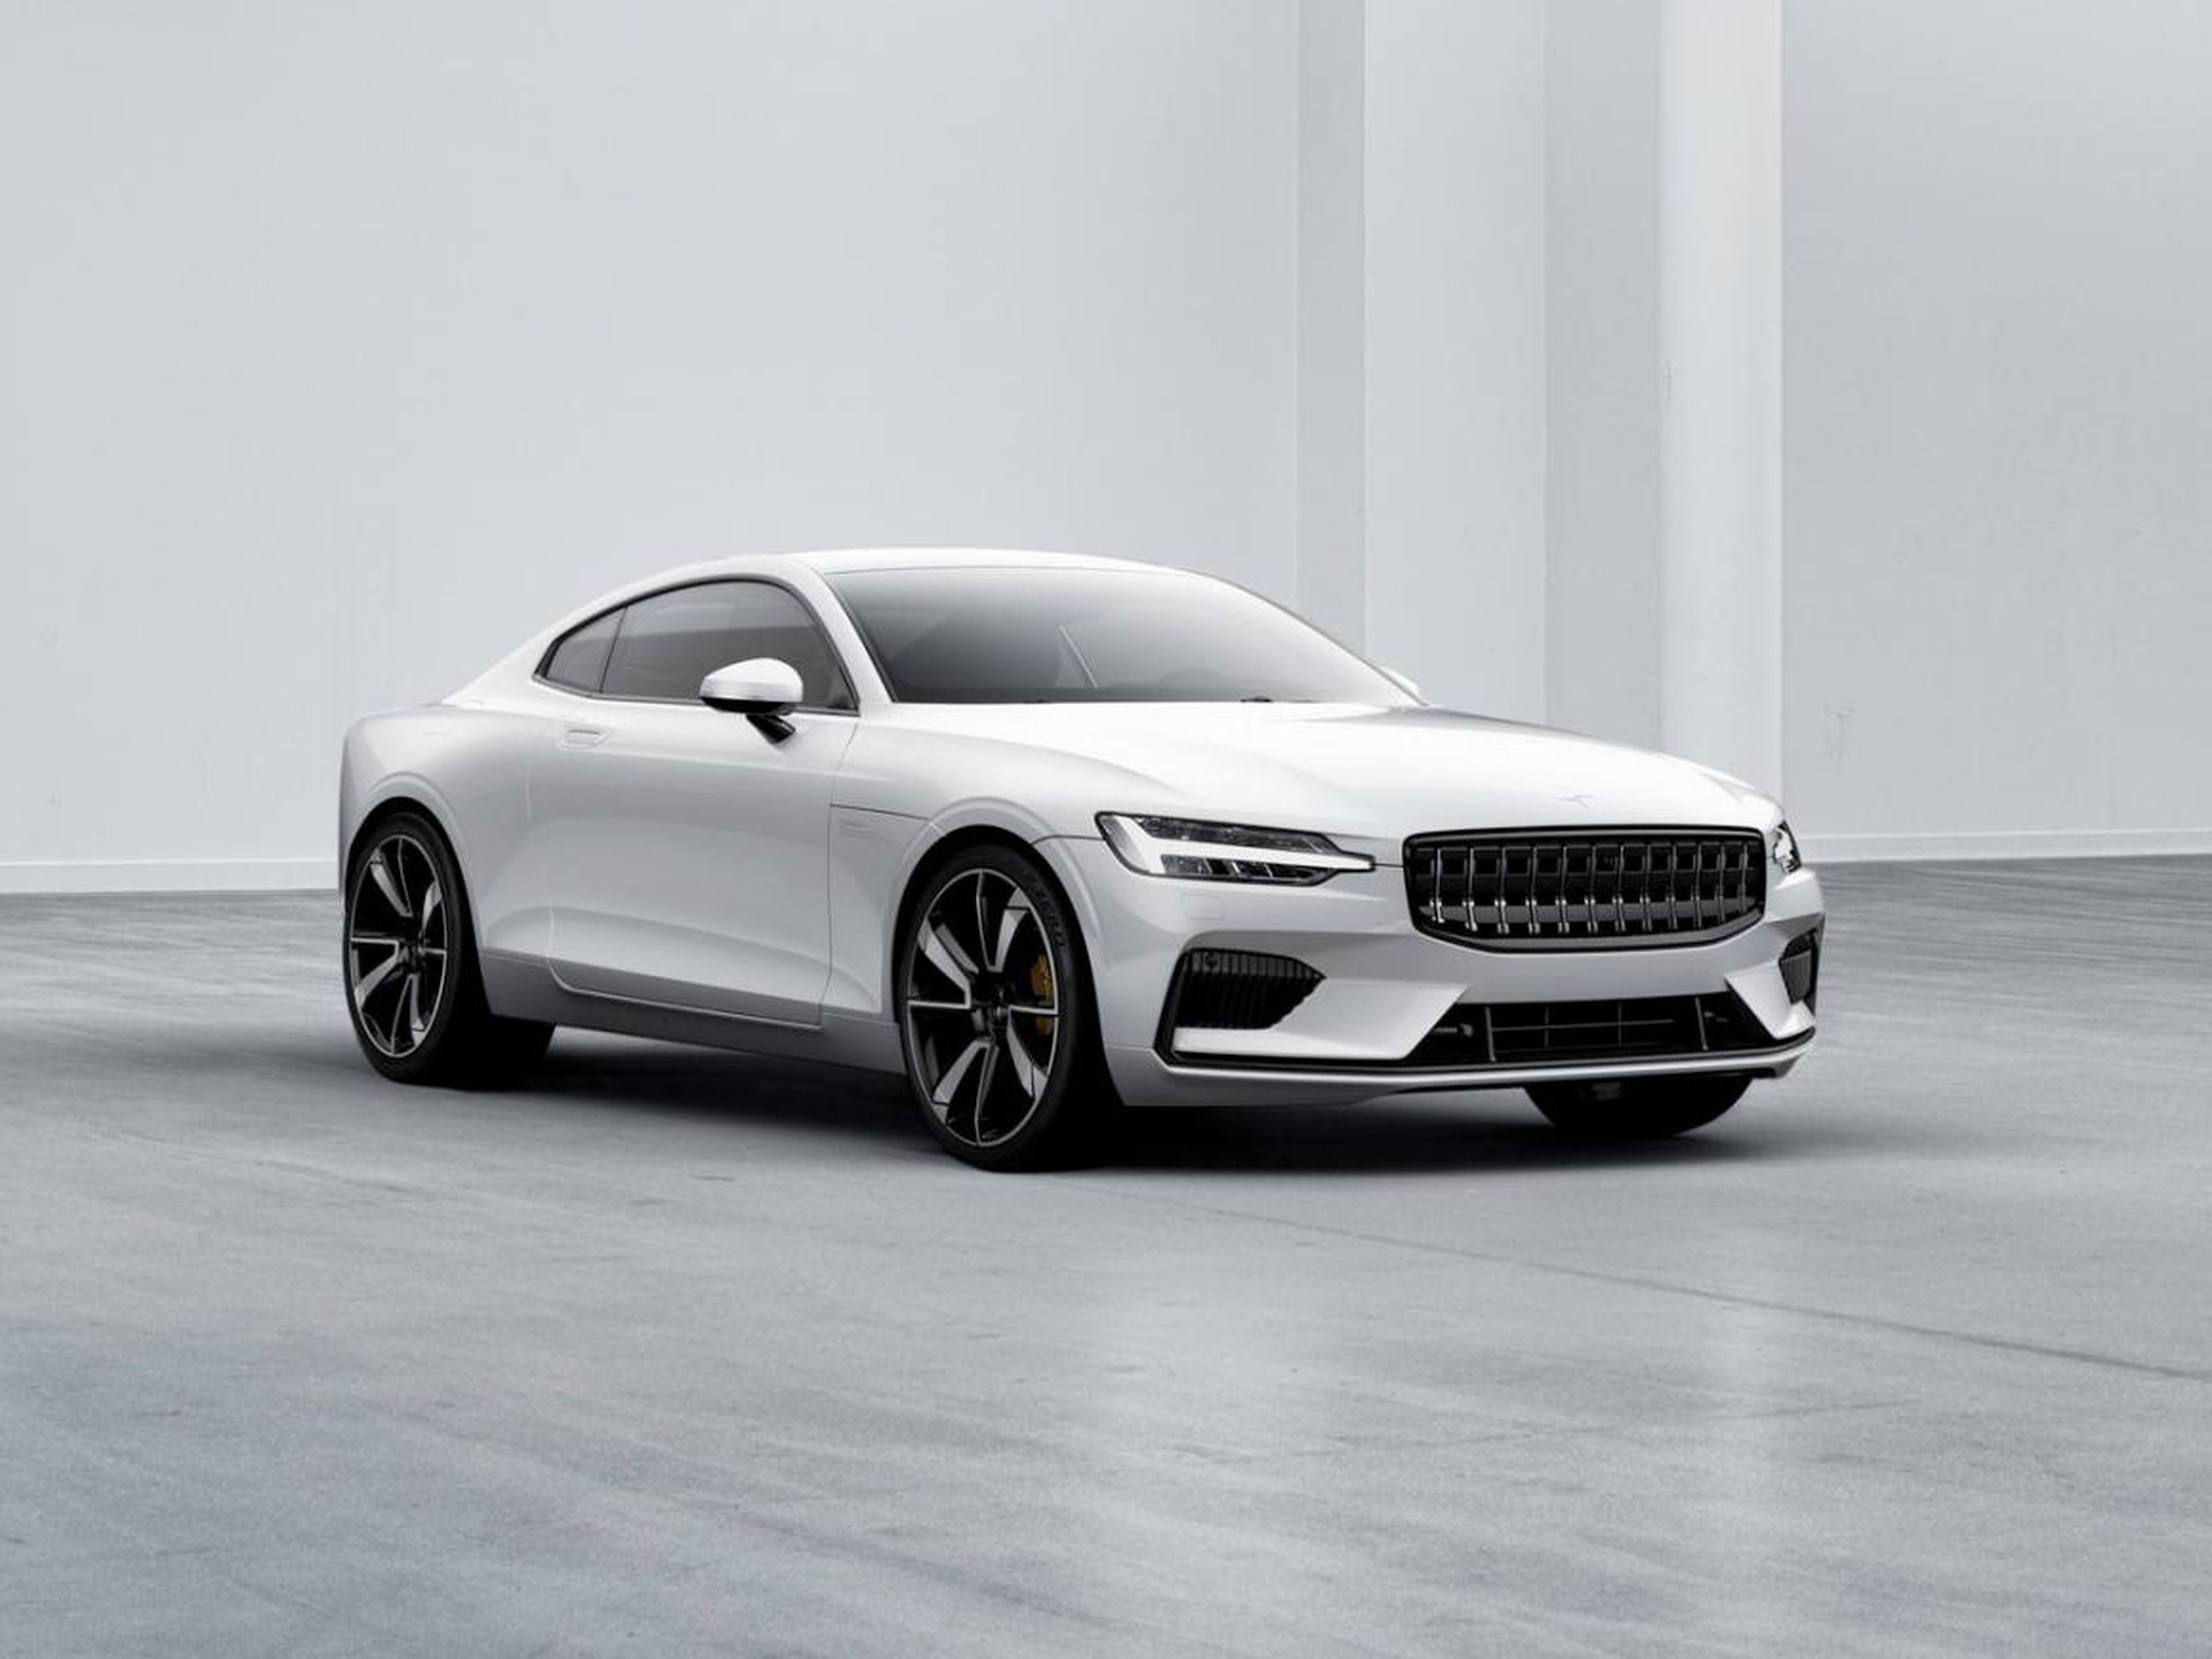 The Polestar 2 will have 350 miles of range.